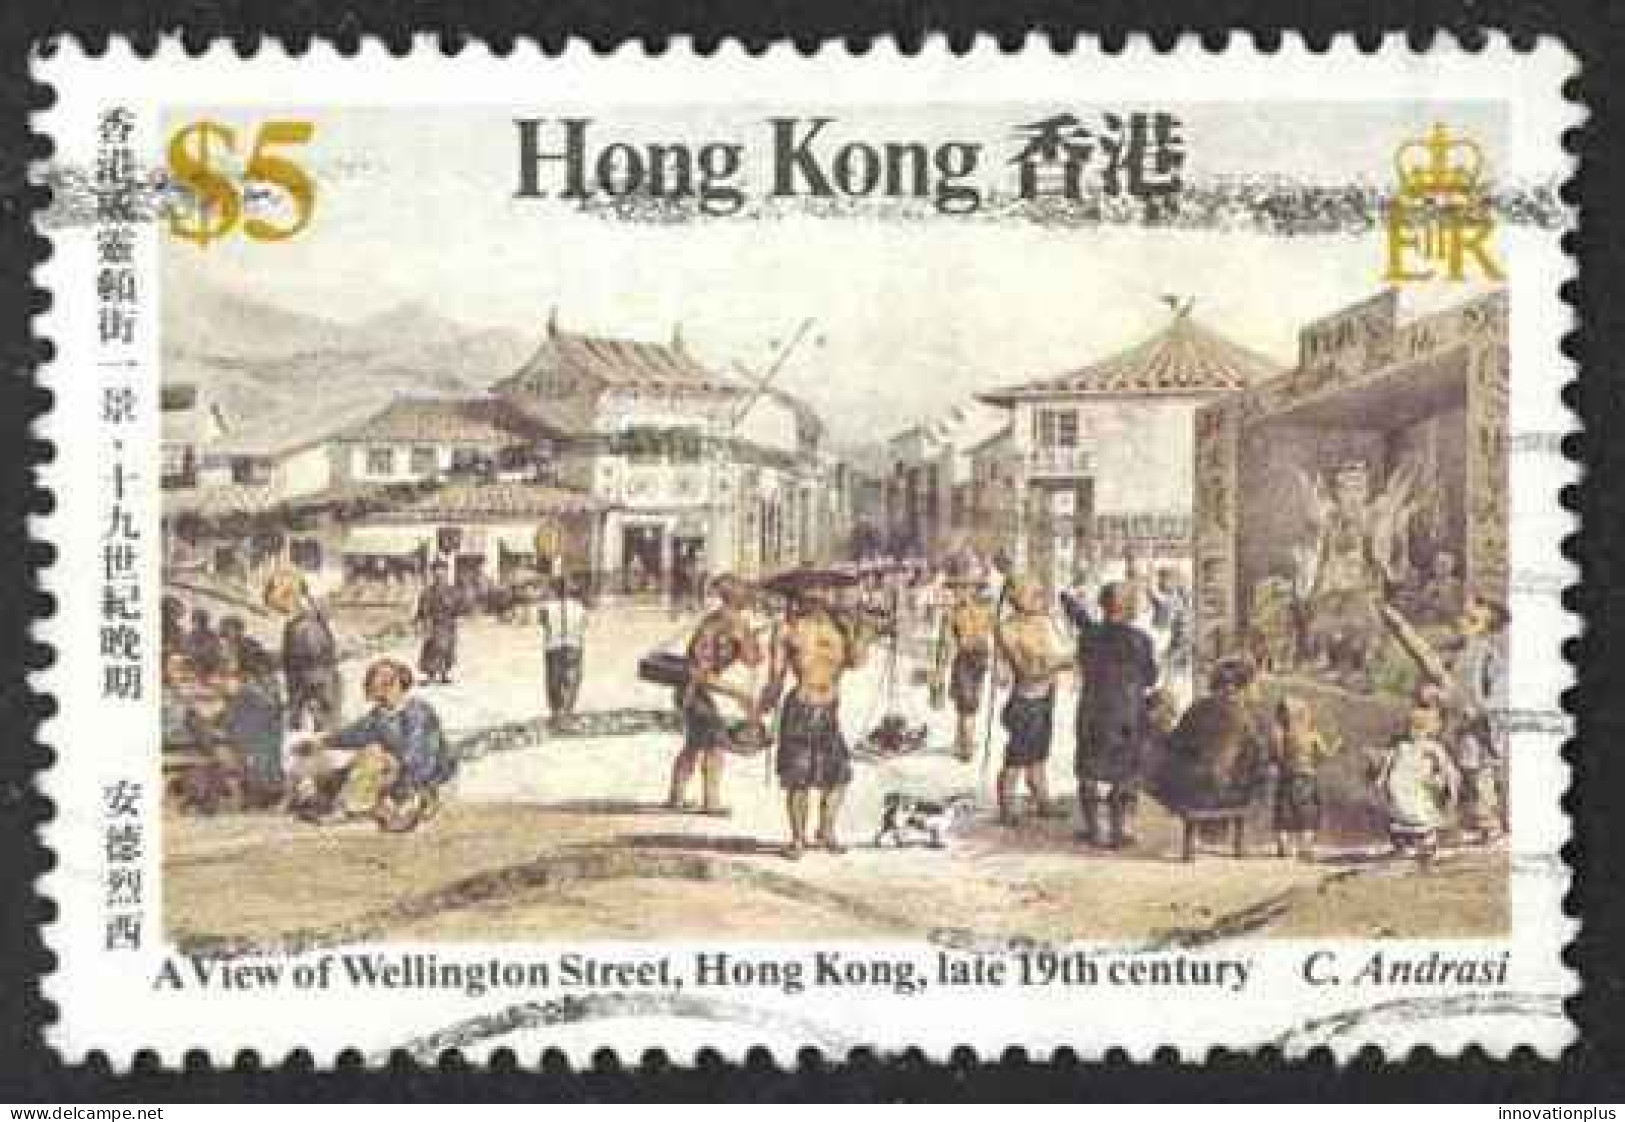 Hong Kong Sc# 489 Used 1987 $5 View Of Wellington Street - Used Stamps